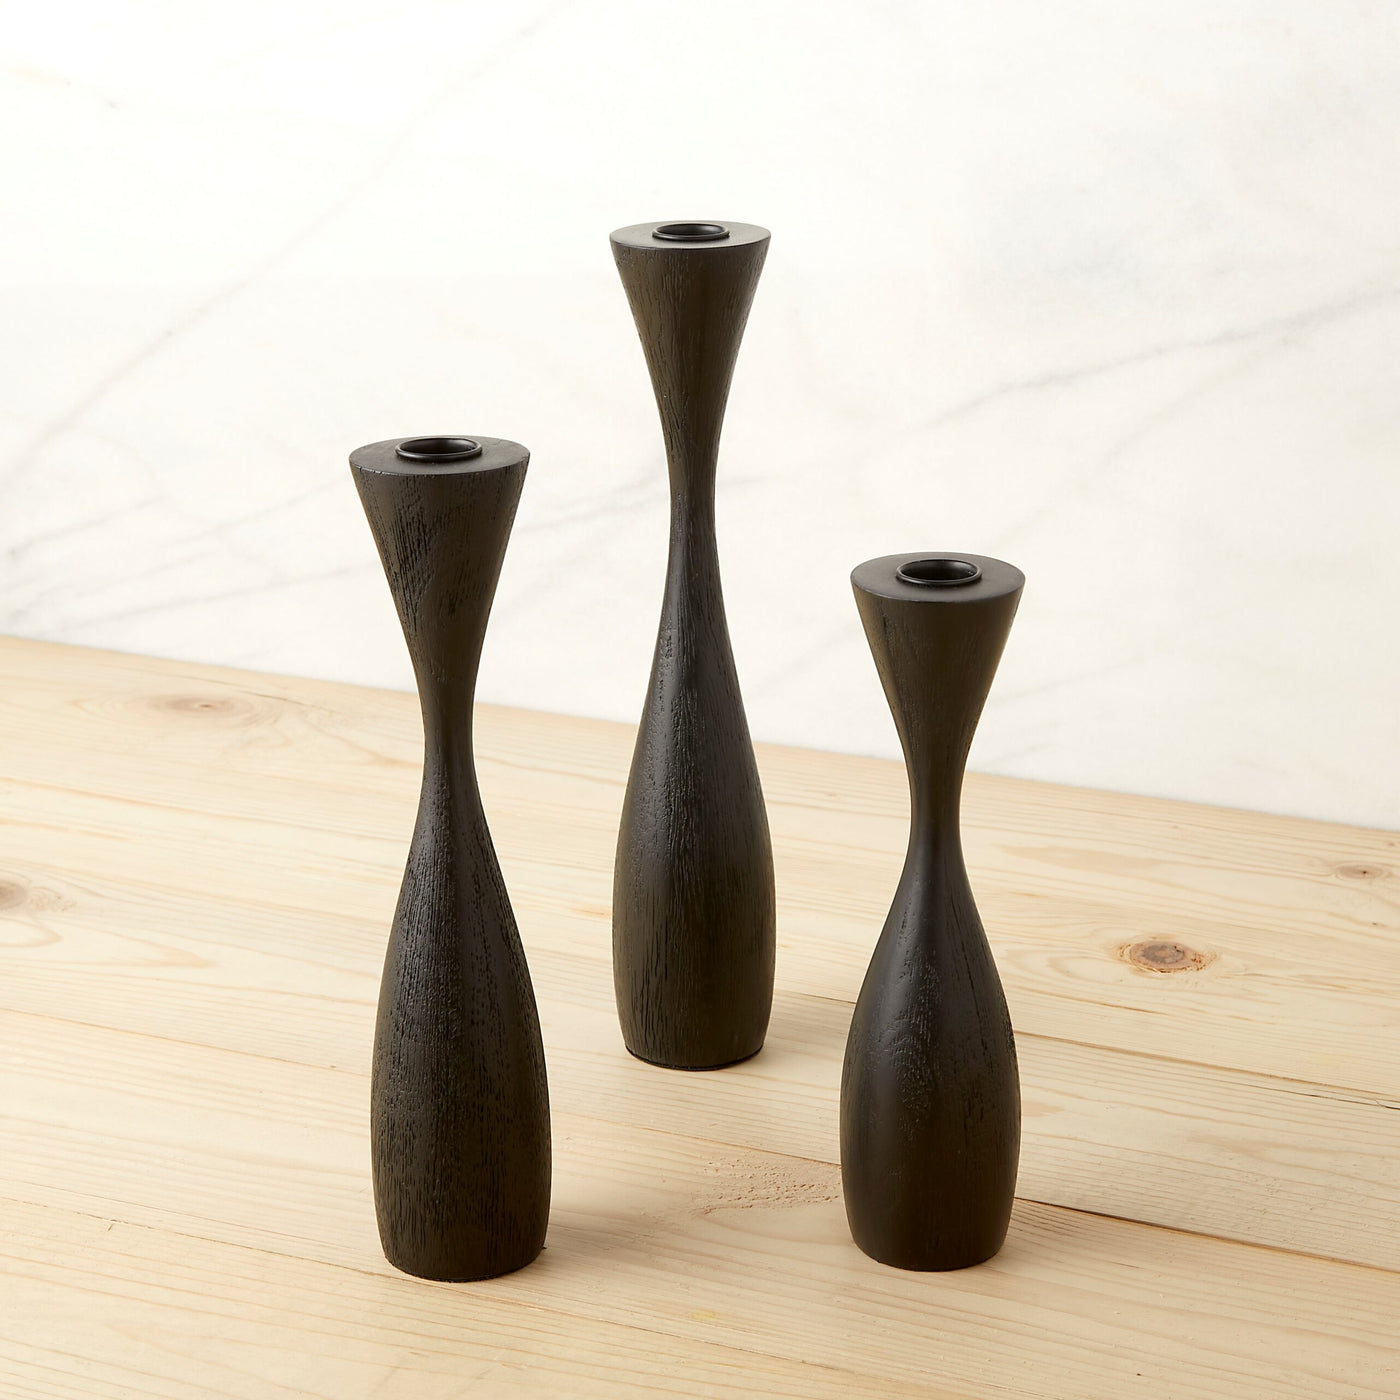 CANDLESTICK BLACK LONG NECK (Available in 2 Sizes)